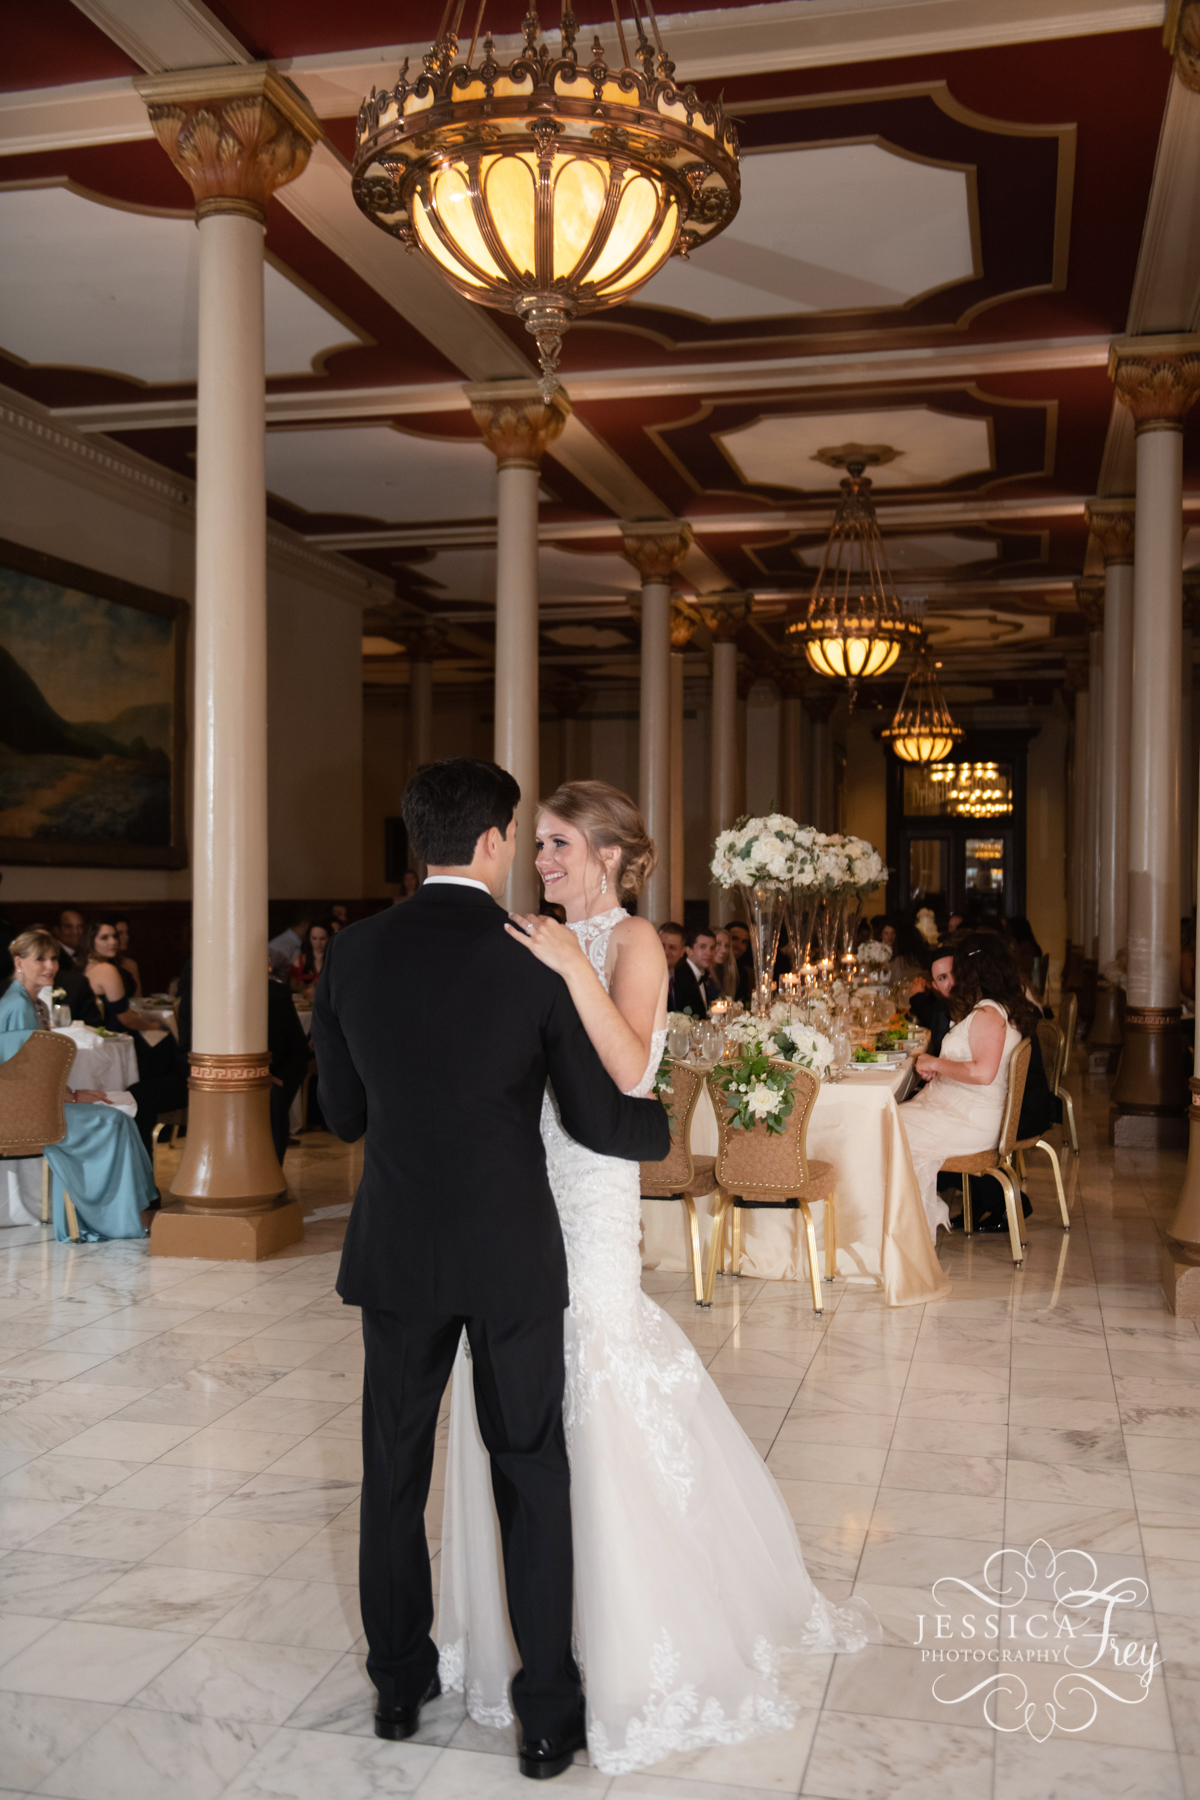 First Dance as husband and wife at The Driskill Hotel in downtown Austin Texas